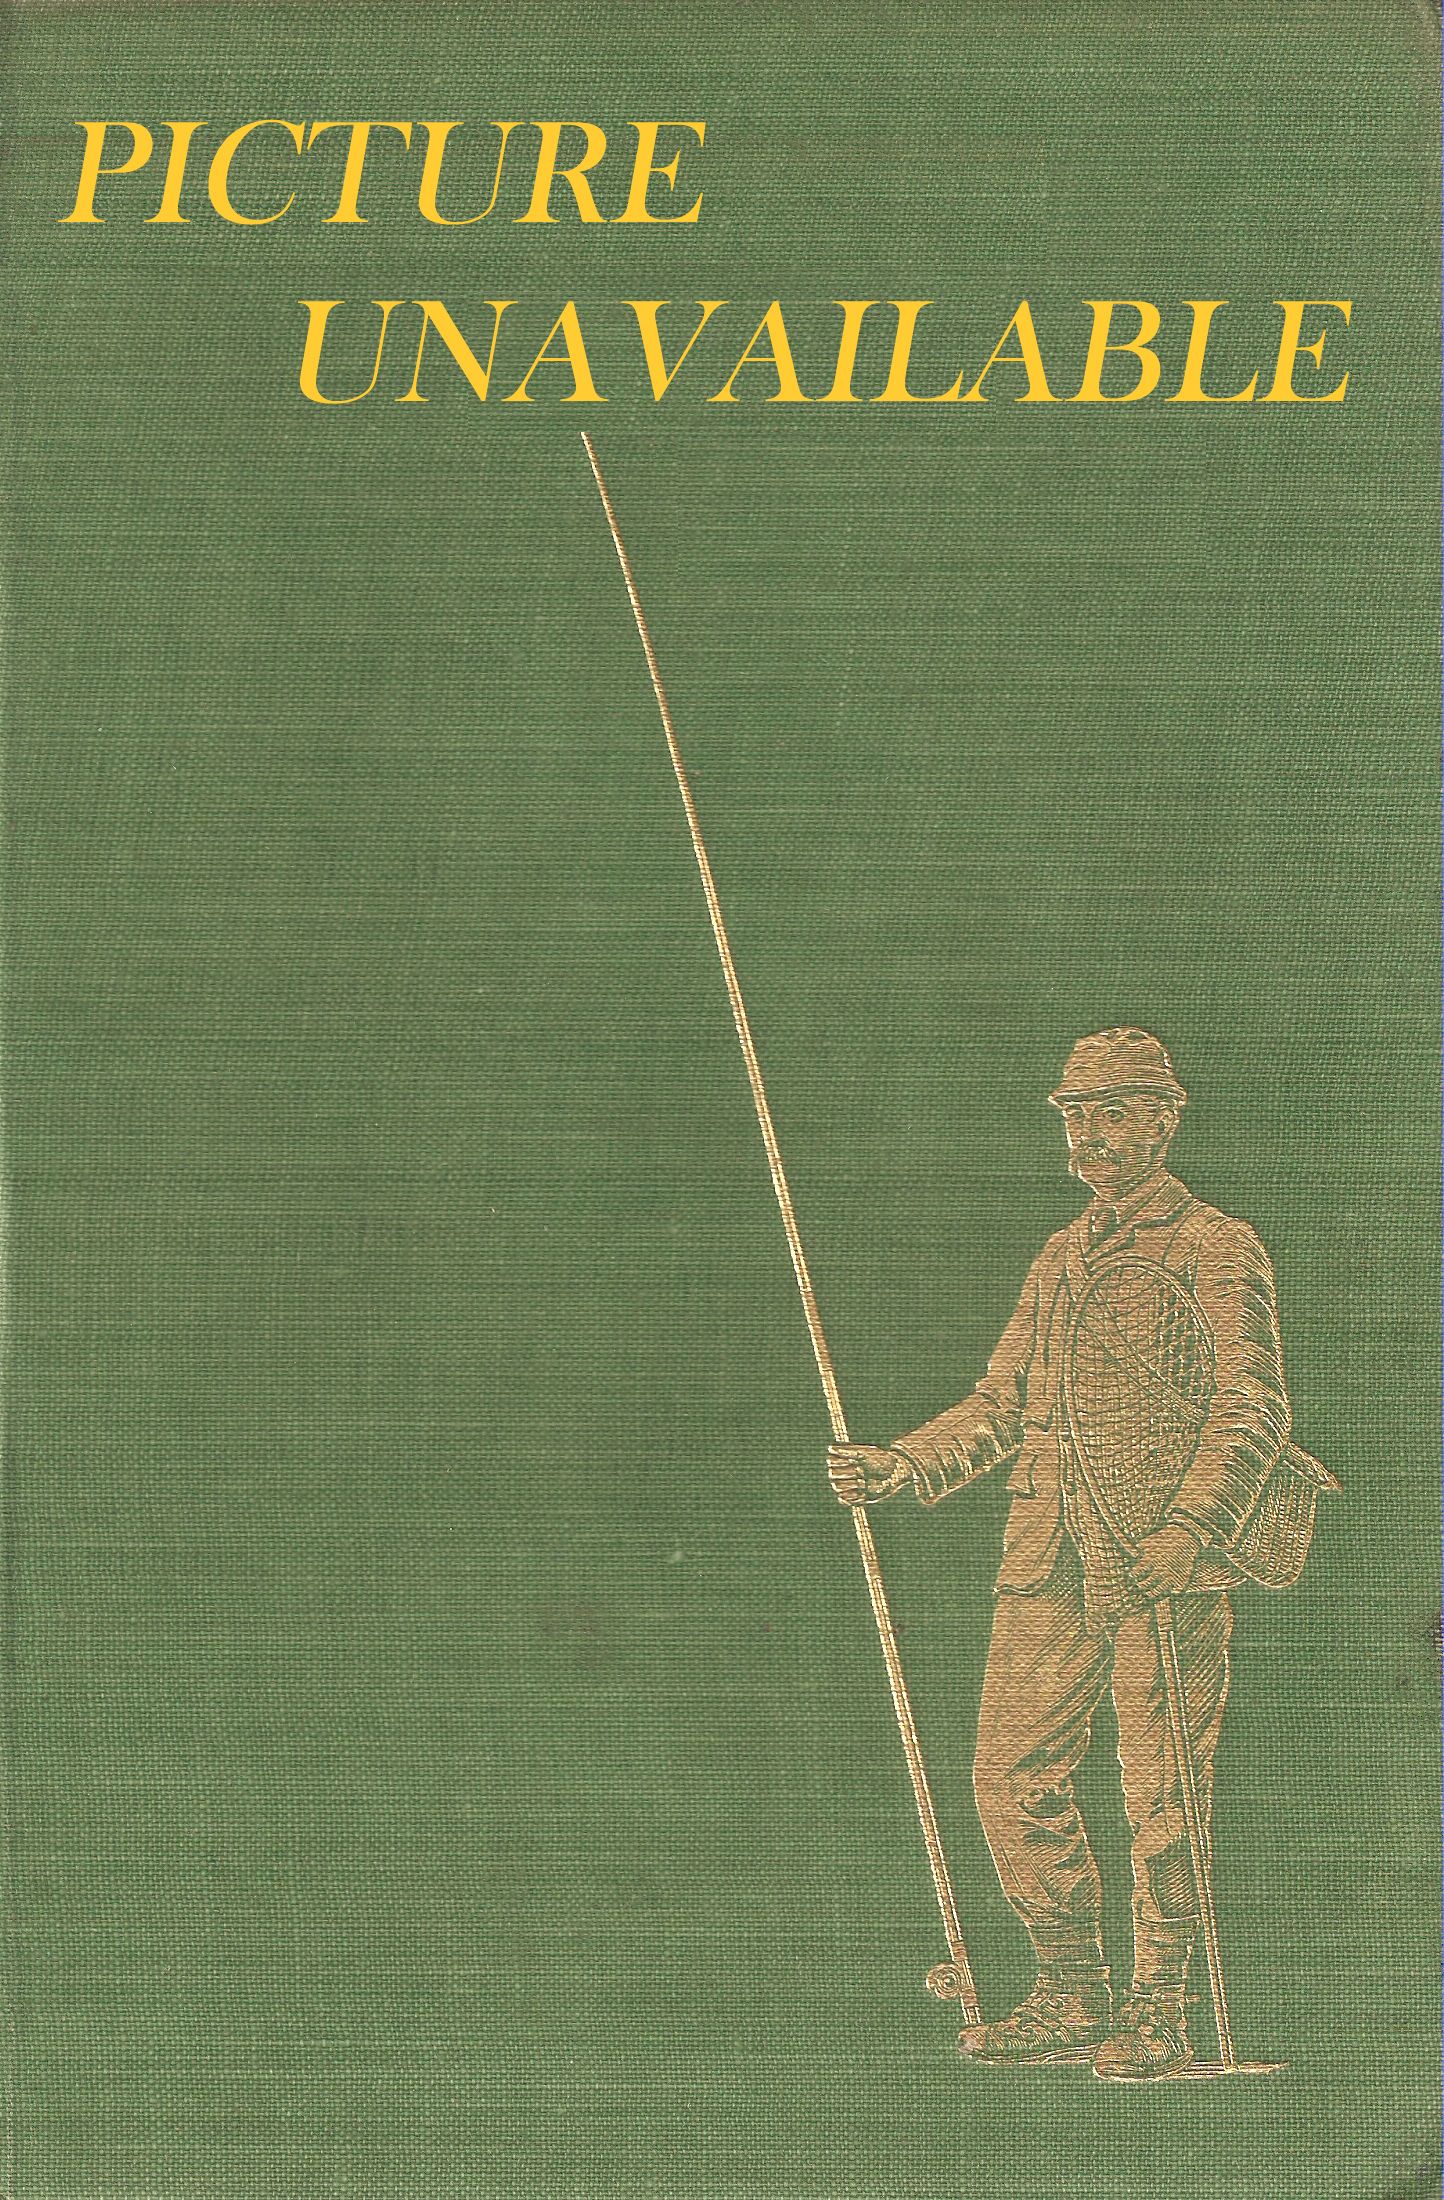 Reel collecting - Old fishing tackle - All Fishing Books